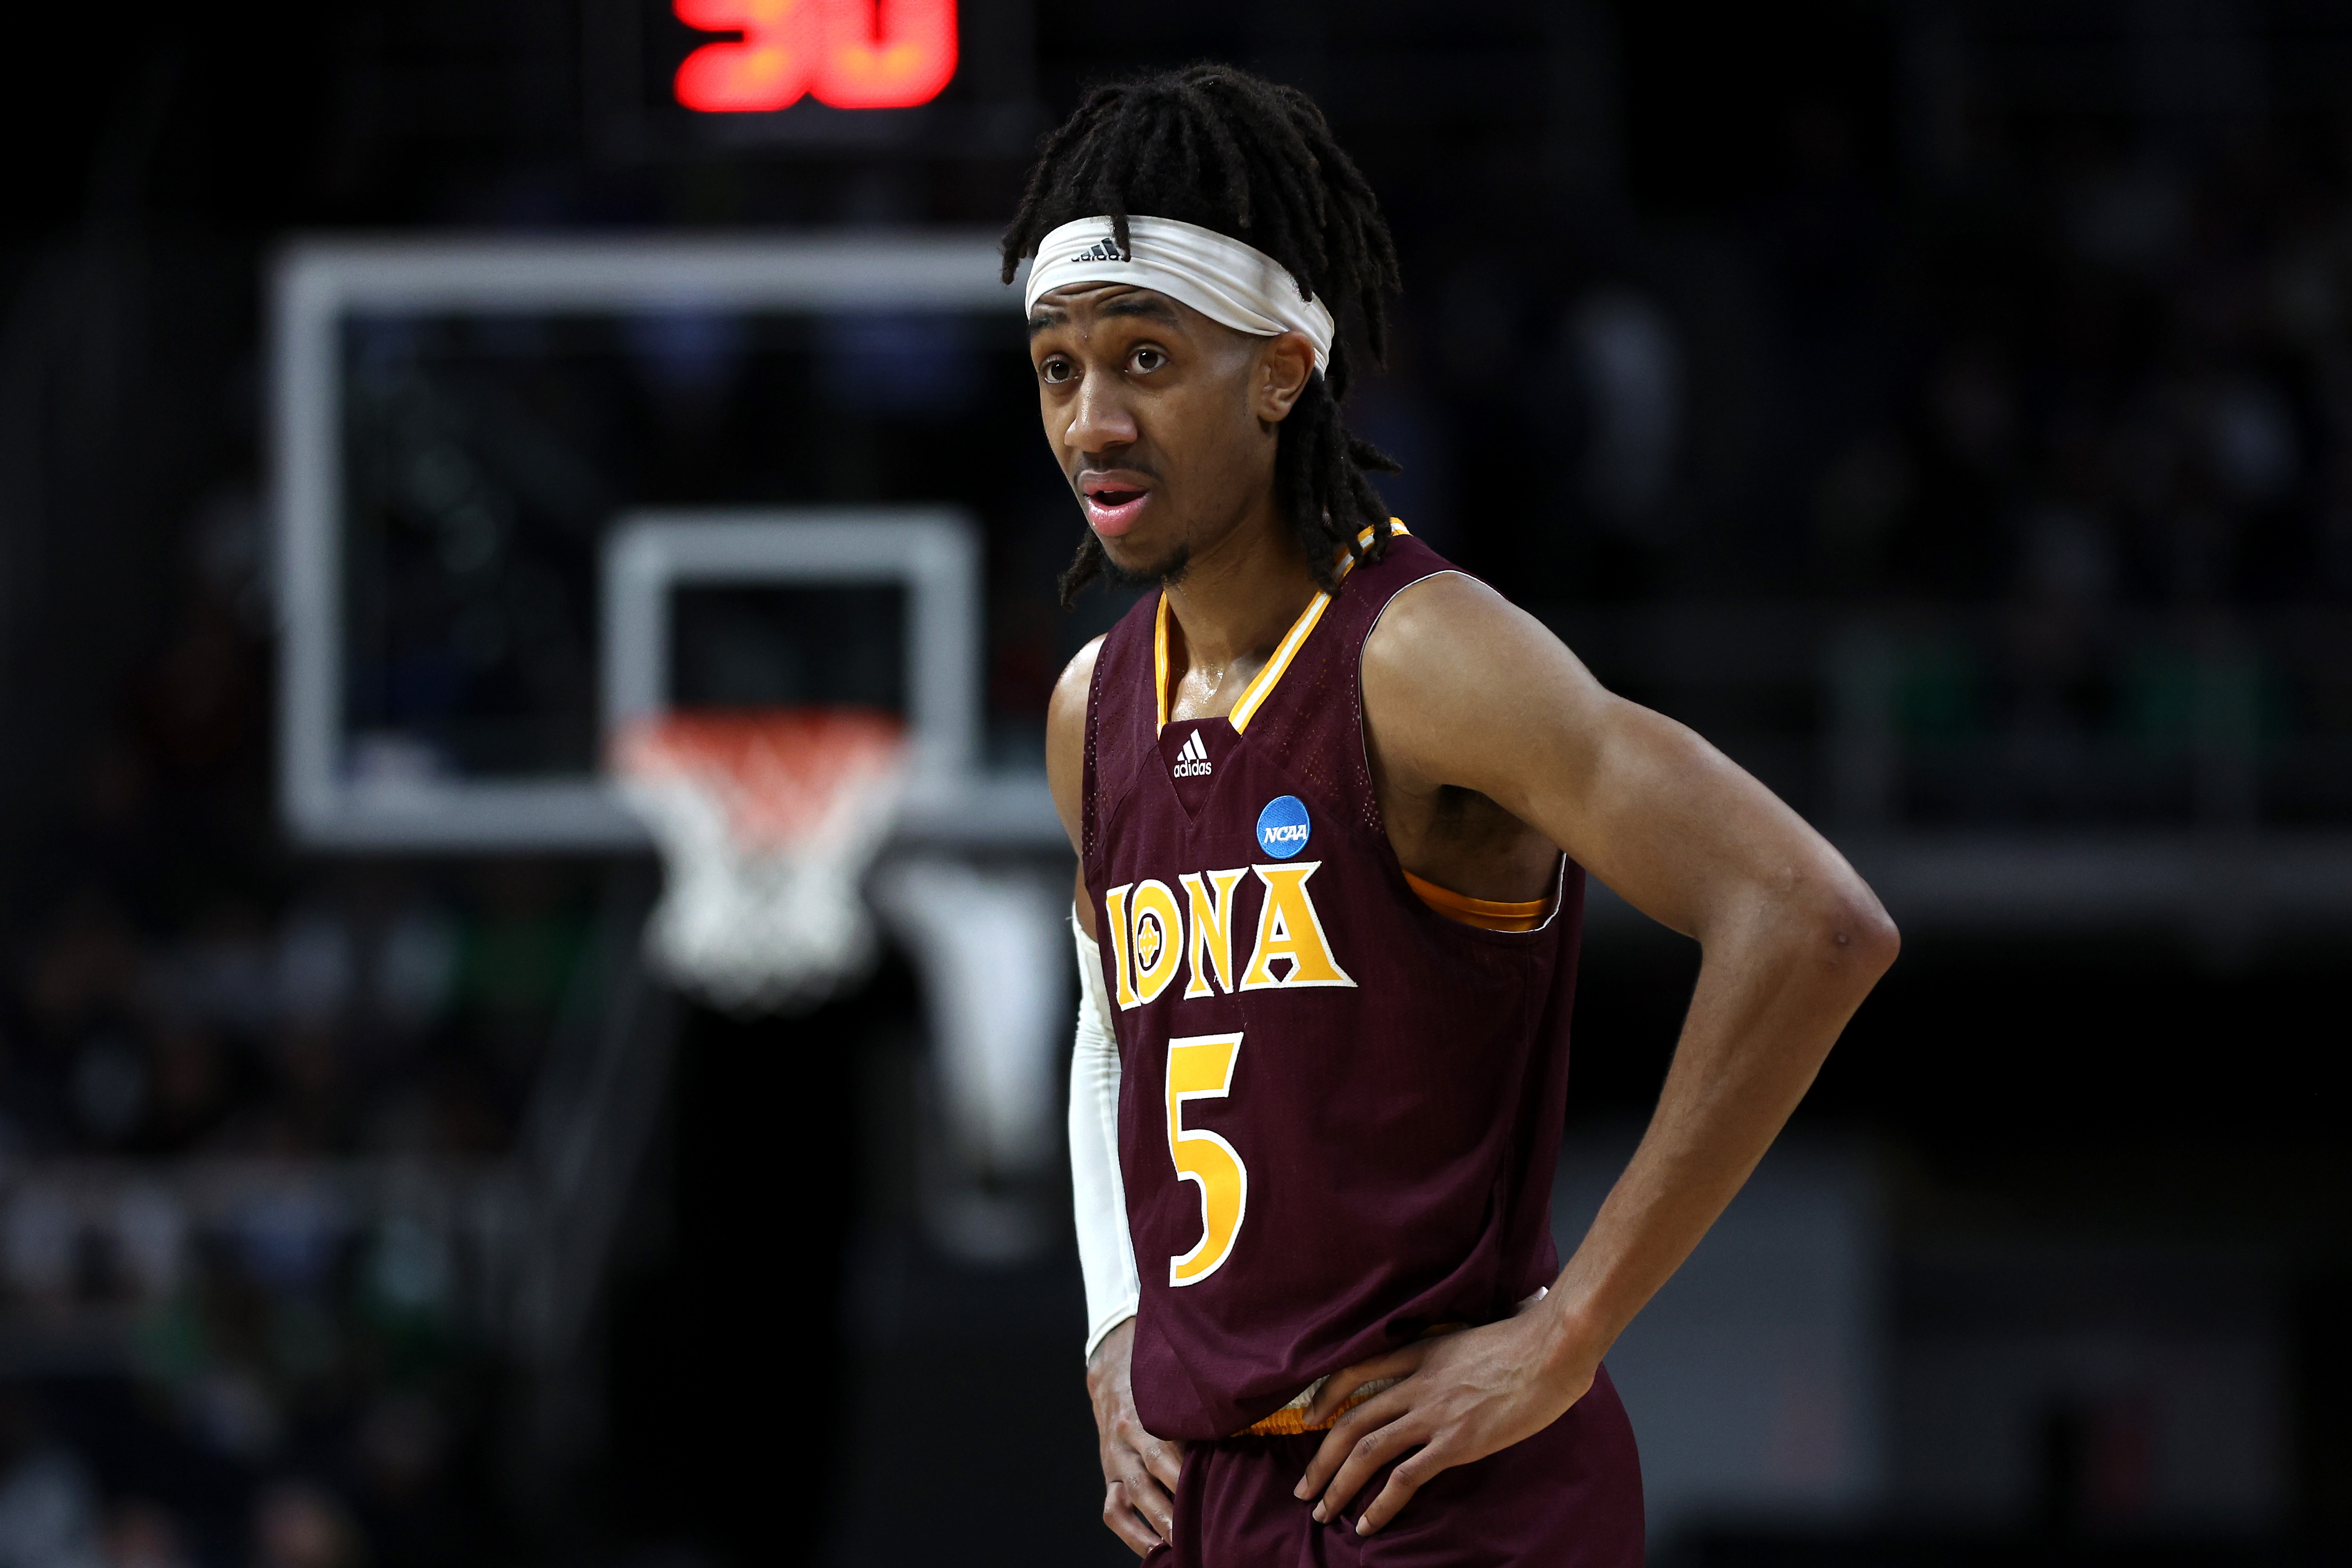 Daniss Jenkins #5 of the Iona Gaels looks on late in the second half against the Connecticut Huskies during the first round of the NCAA Men’s Basketball Tournament at MVP Arena on March 17, 2023 in Albany, New York.